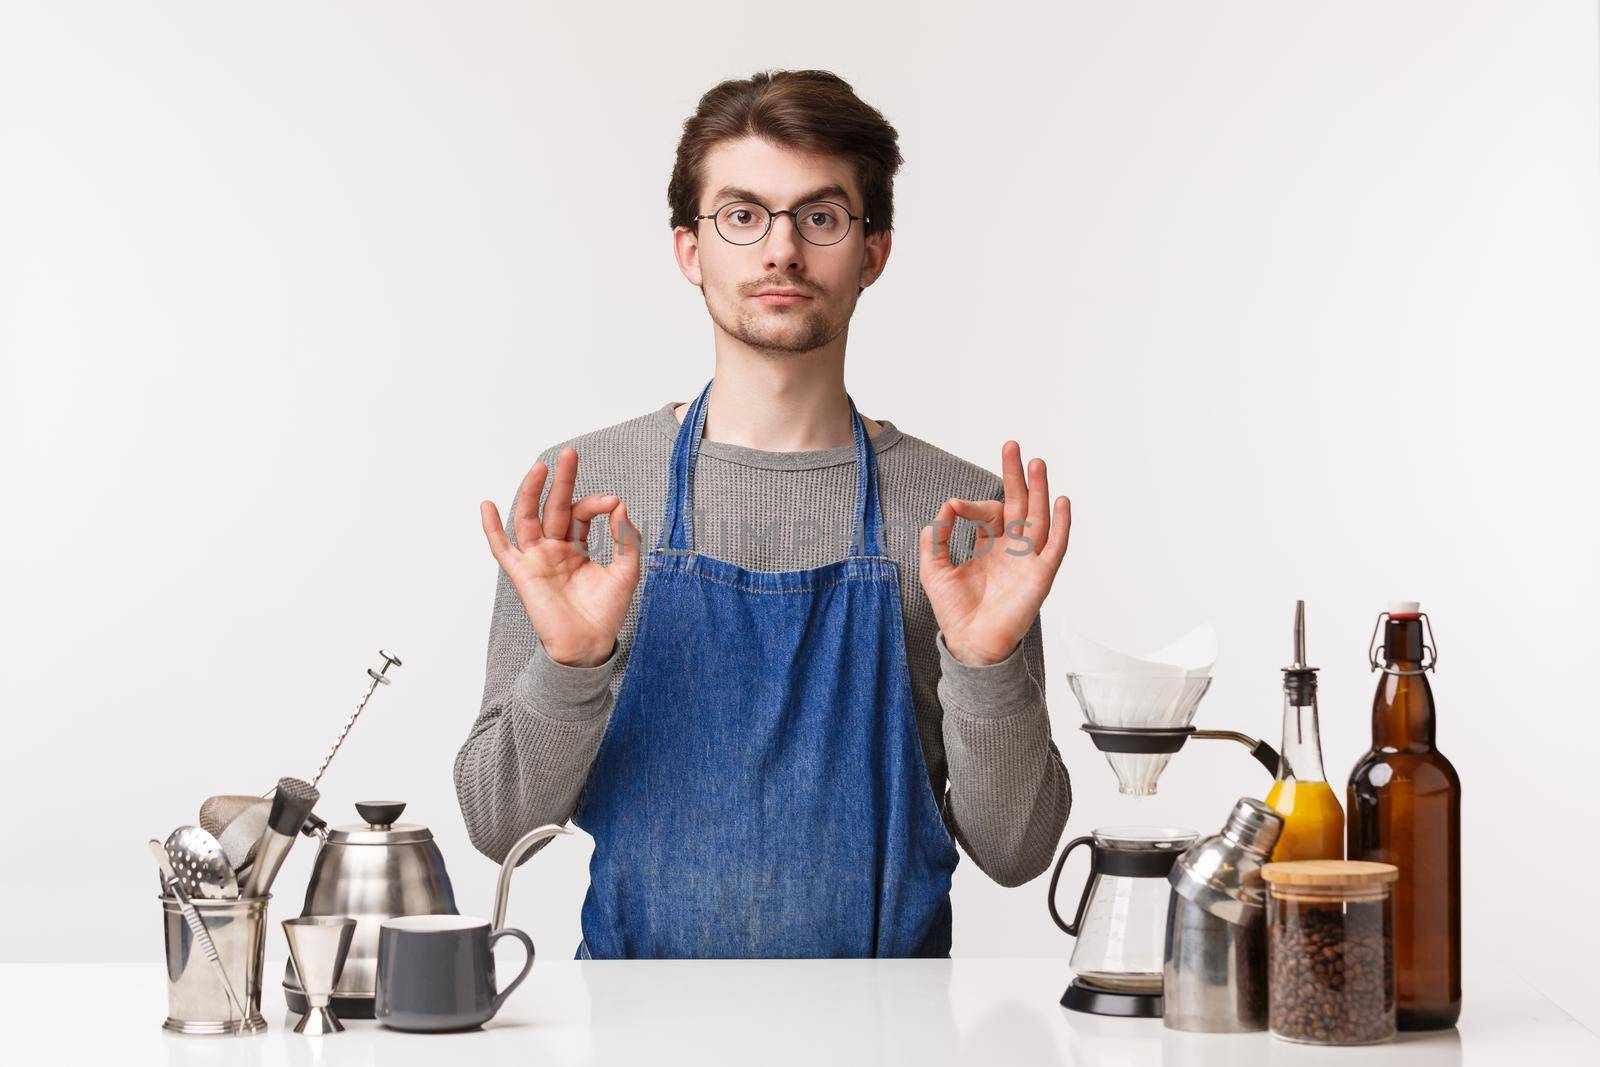 Barista, cafe worker and bartender concept. Portrait of serious-looking young caucasian guy in glasses and apron, show okay excellent sign, agree or guarantee customer will like coffee.